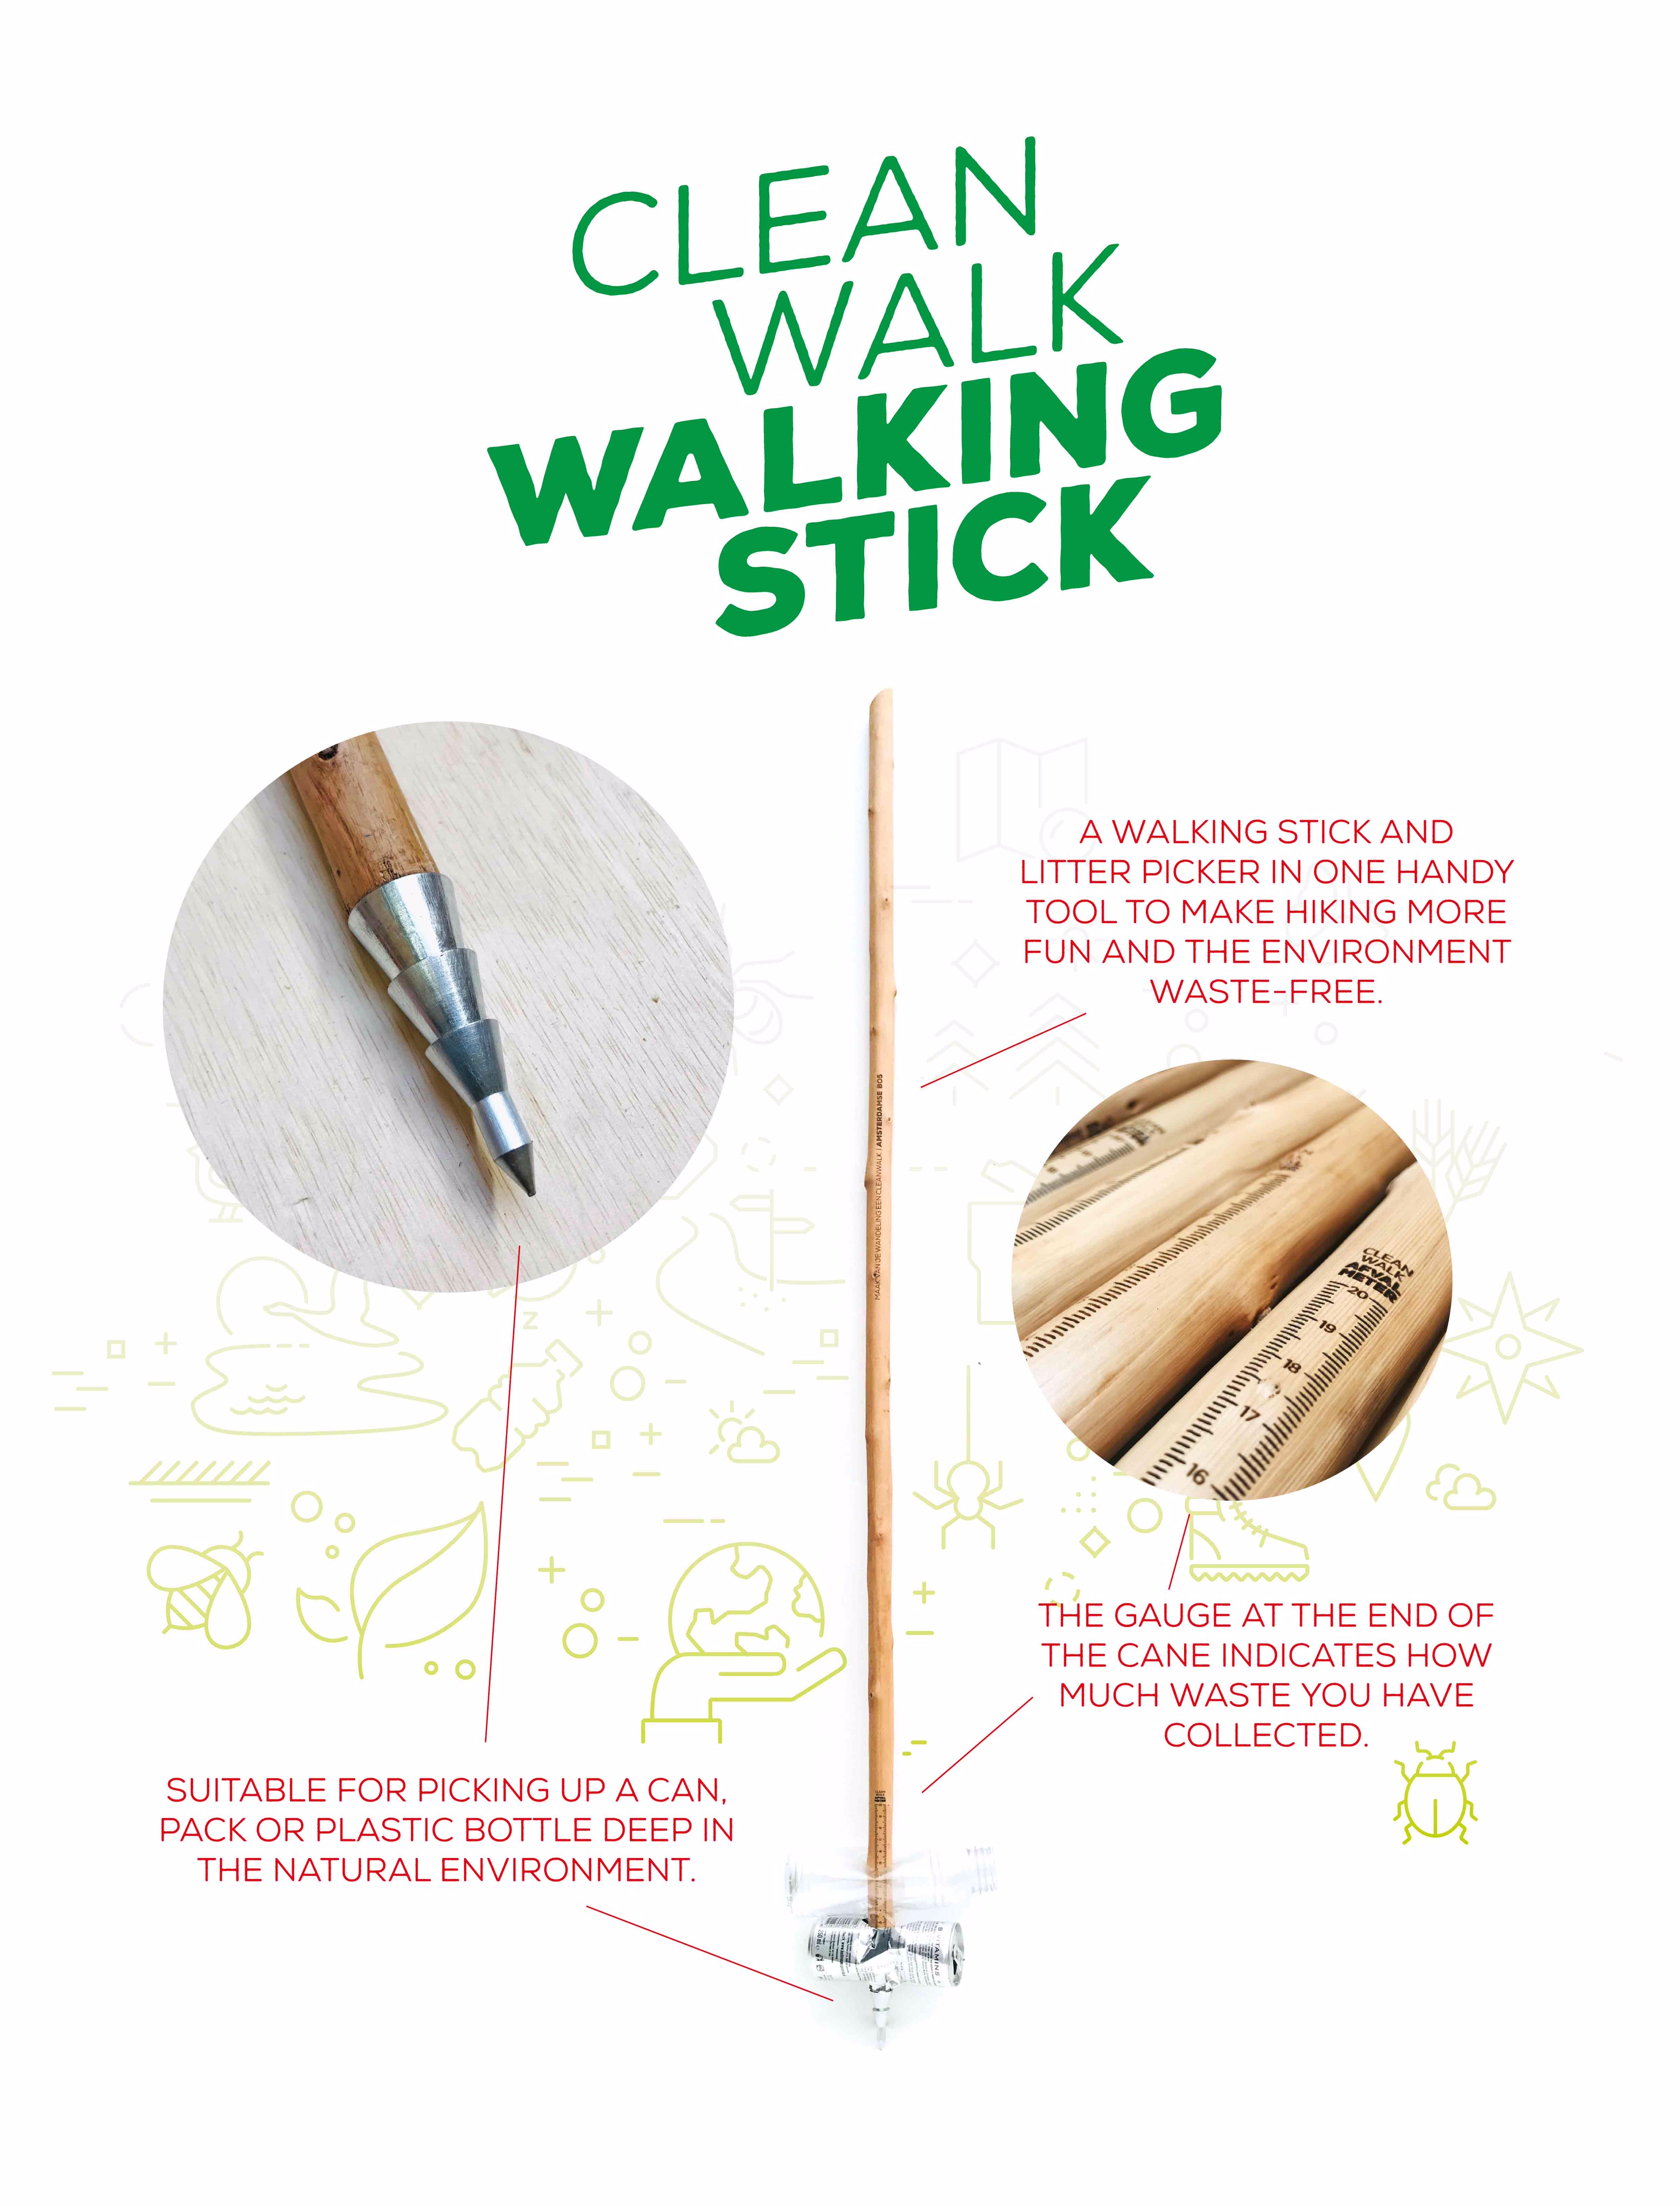 A walking stick and litter picker in one handy tool to make hiking more fun and the environment waste-free.